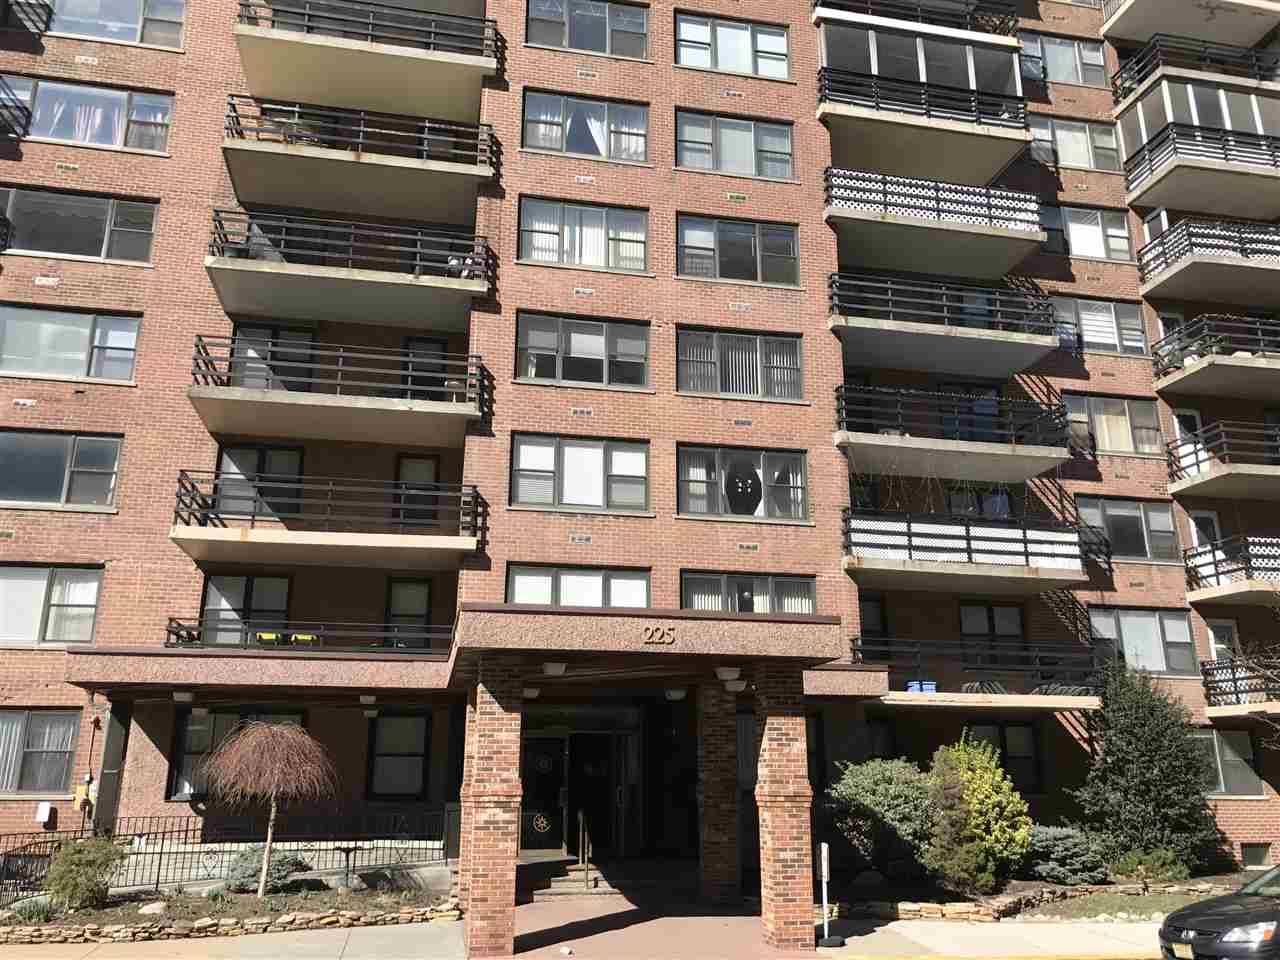 24-HOUR DOORMAN AND SECURITY - 1 BR Condo Journal Square New Jersey